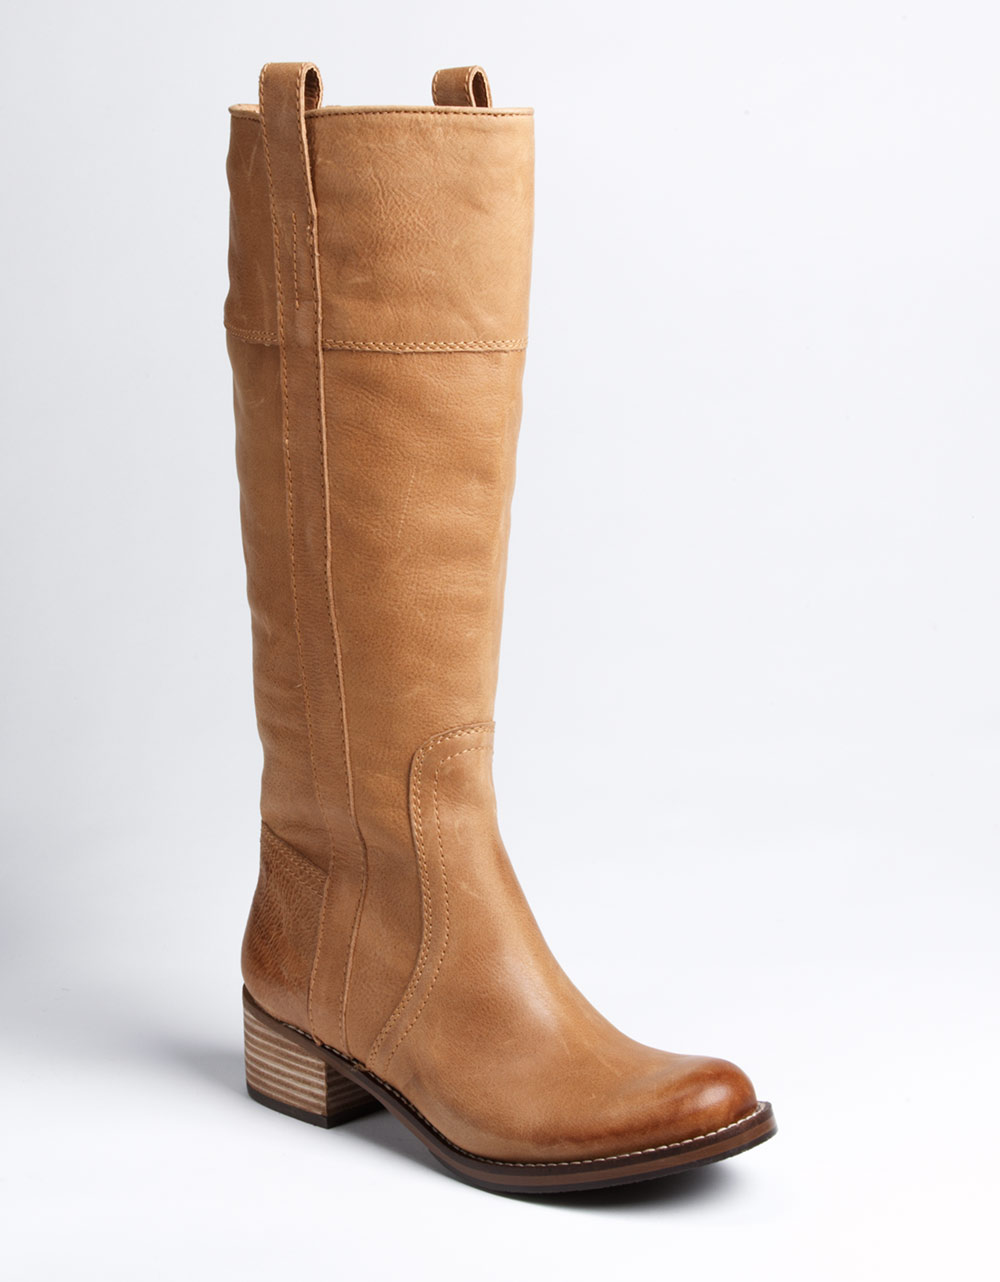 Lucky Brand Hibiscus Tall Boots in Tan Leather (Brown) - Lyst